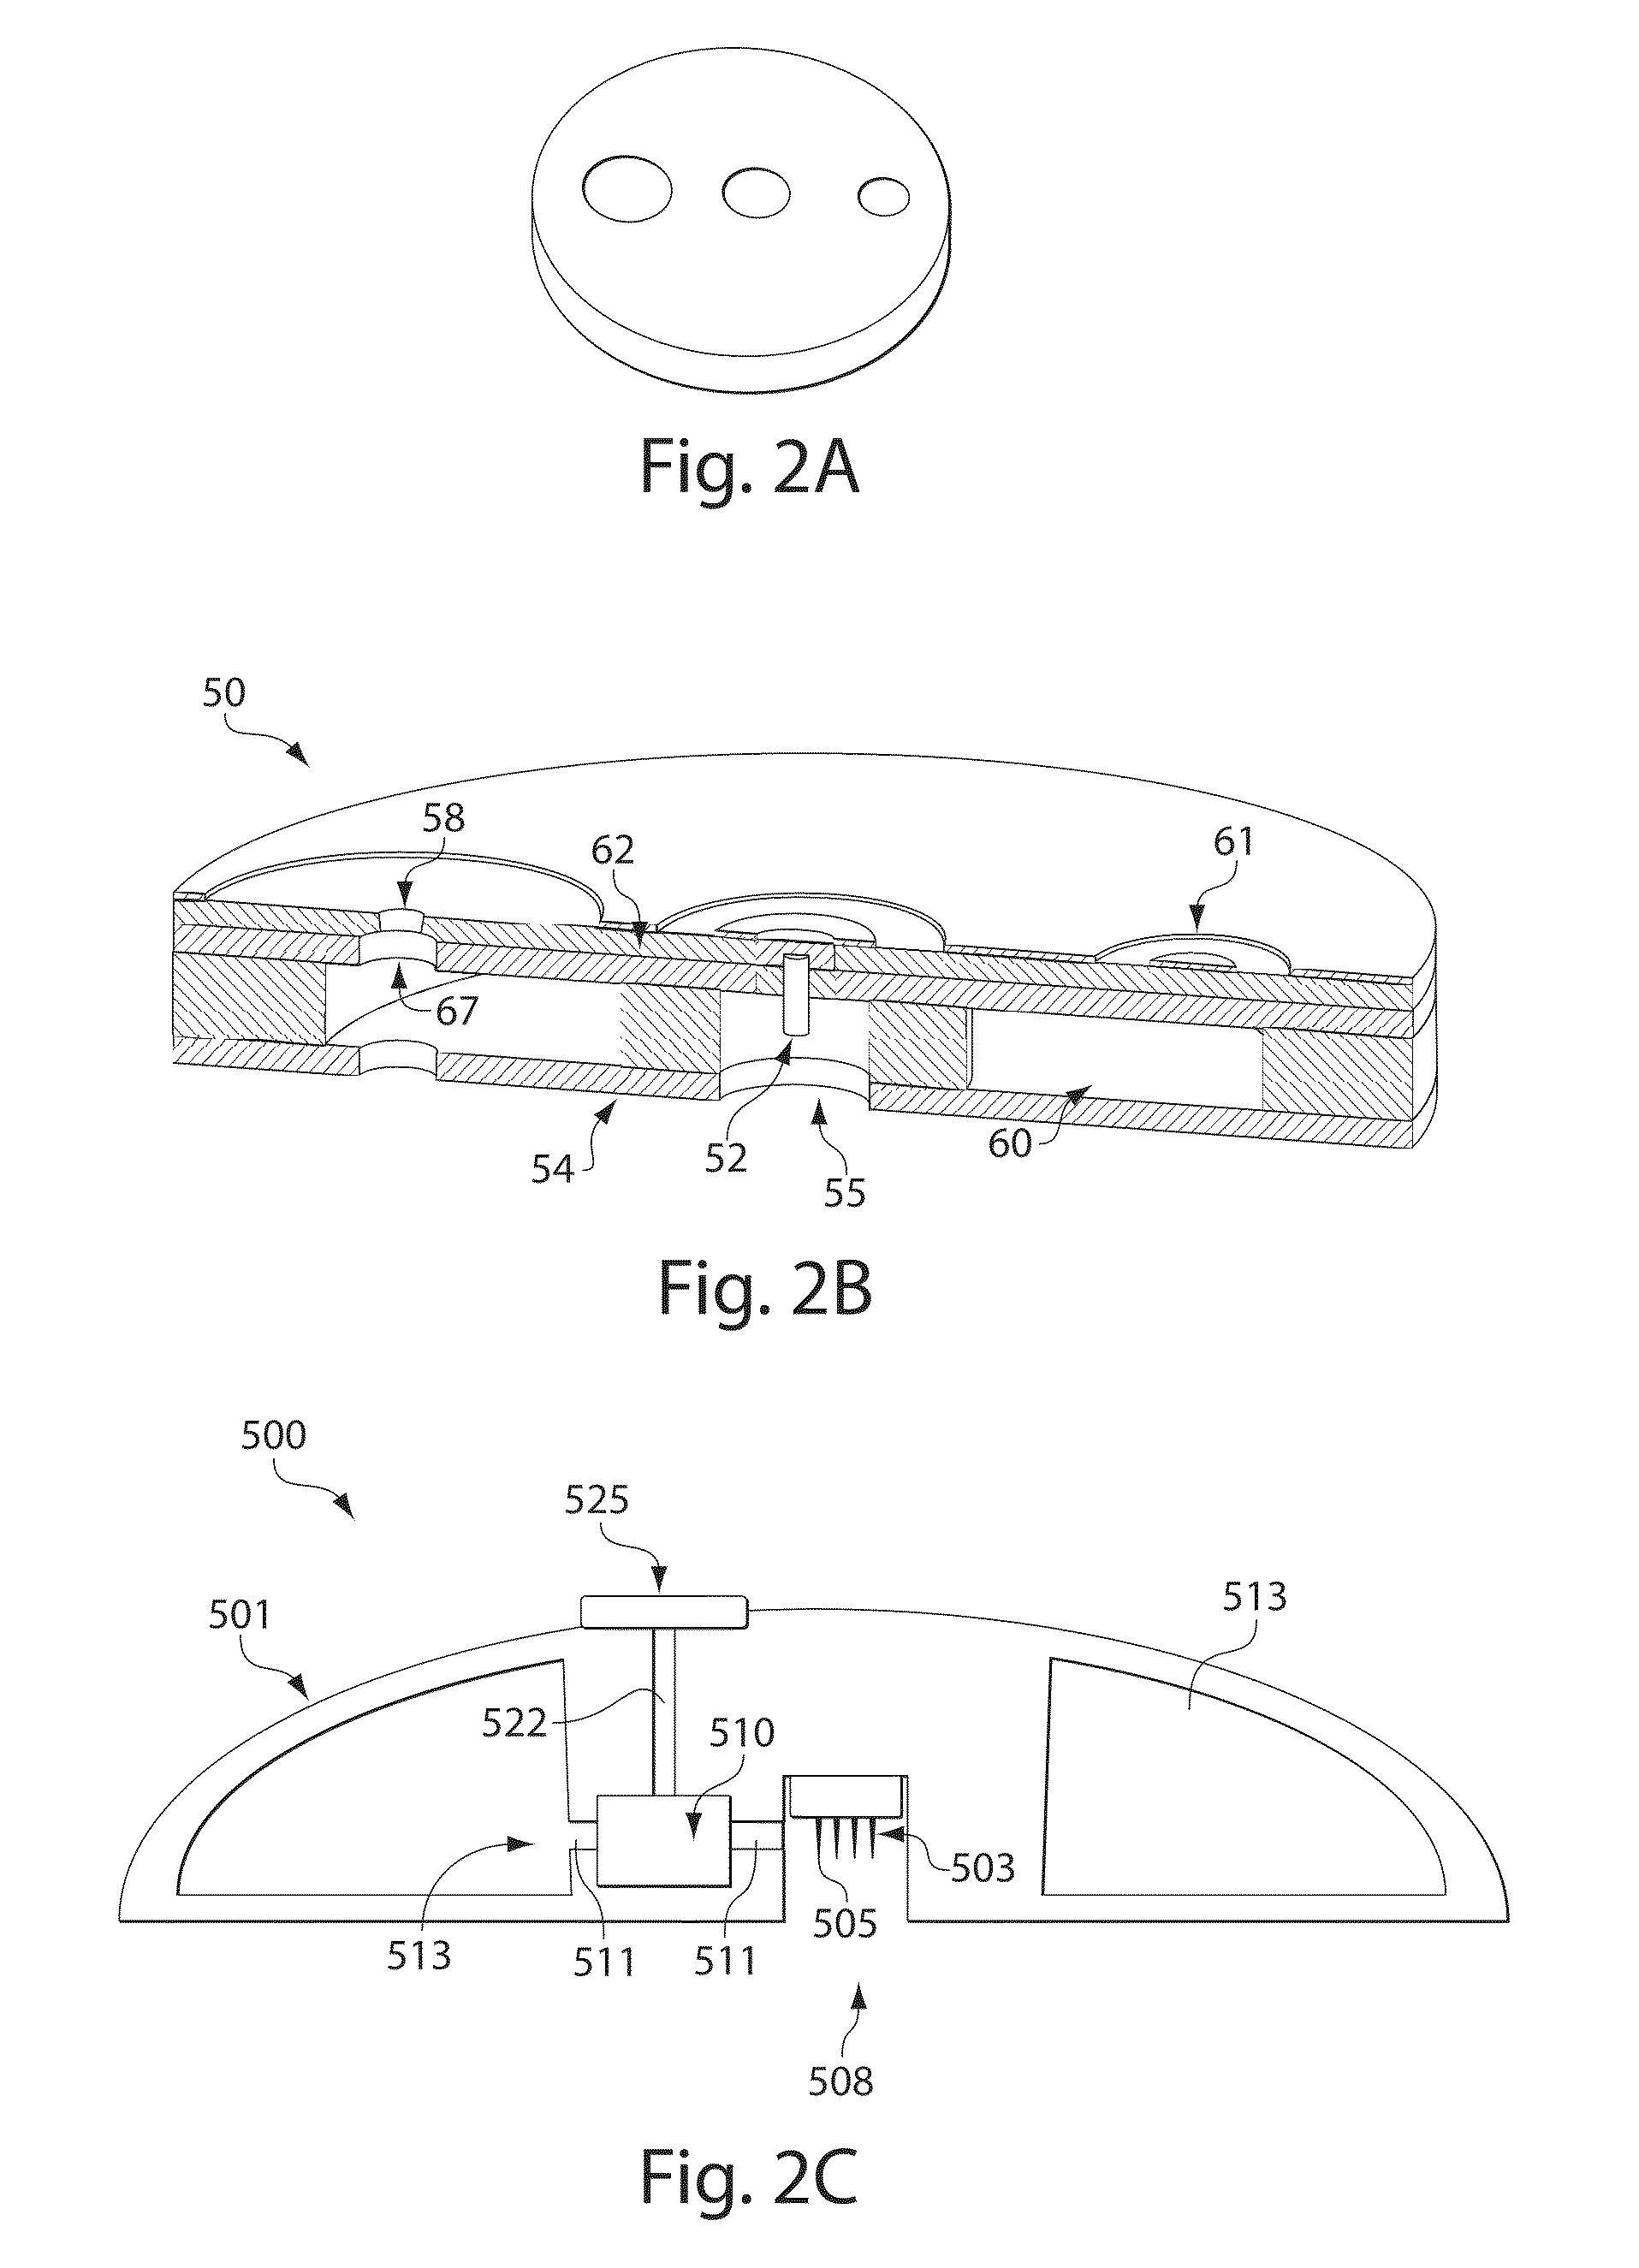 Sampling devices and methods involving relatively little pain